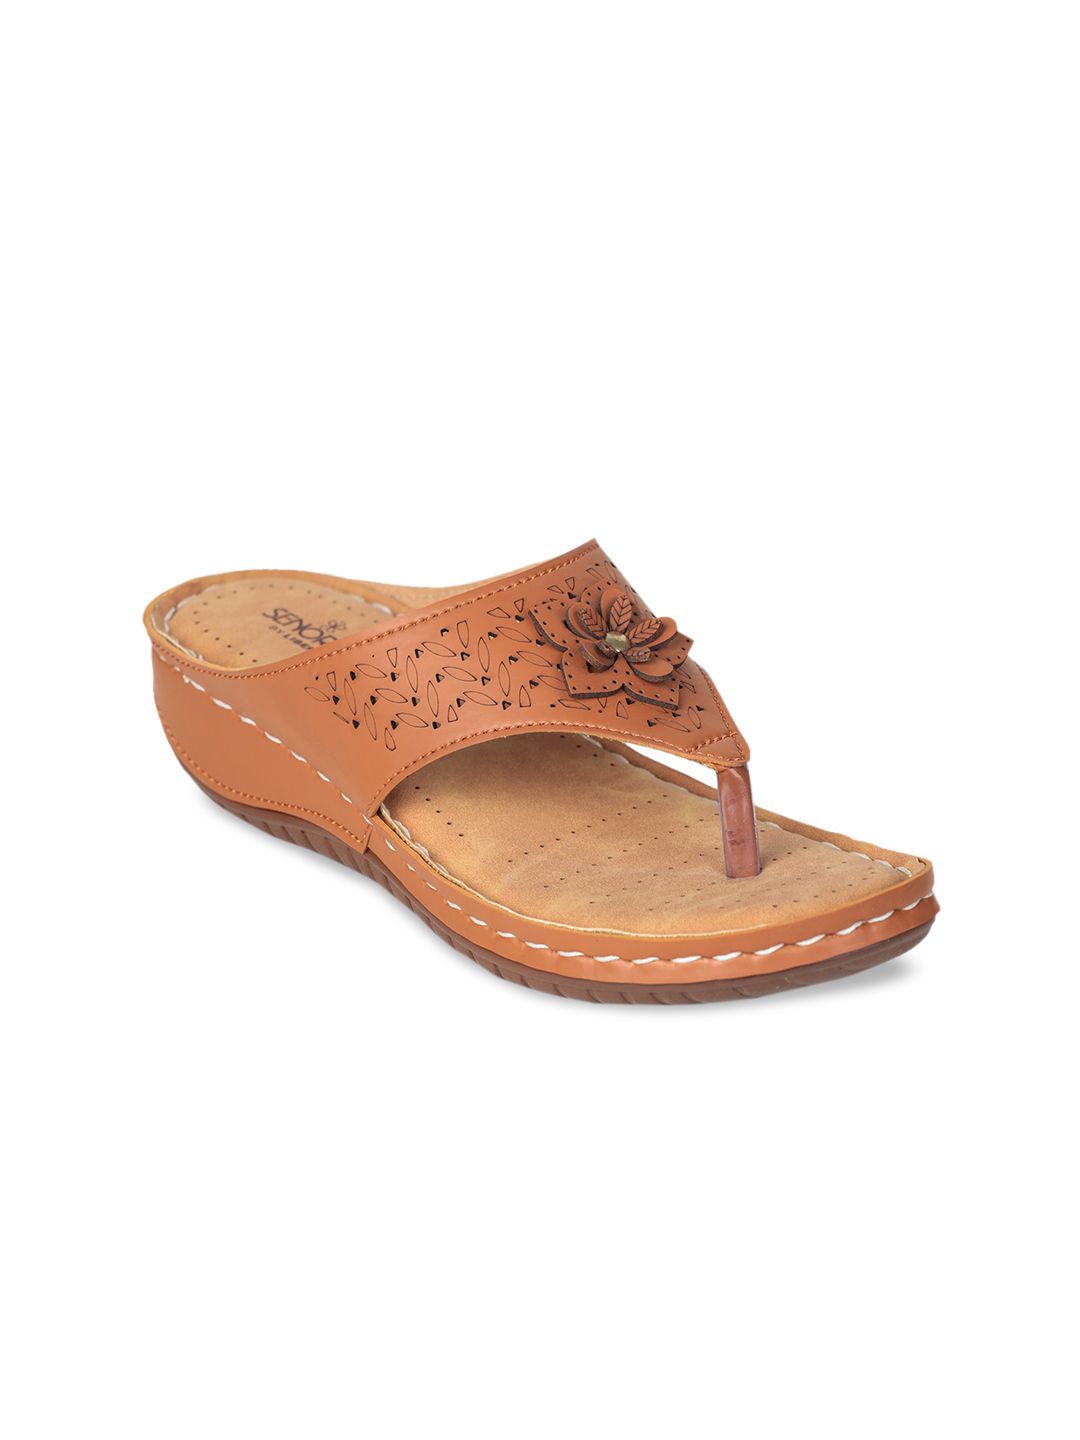 Liberty  Women Tan Textured PU Comfort Sandals with Laser Cuts Price in India